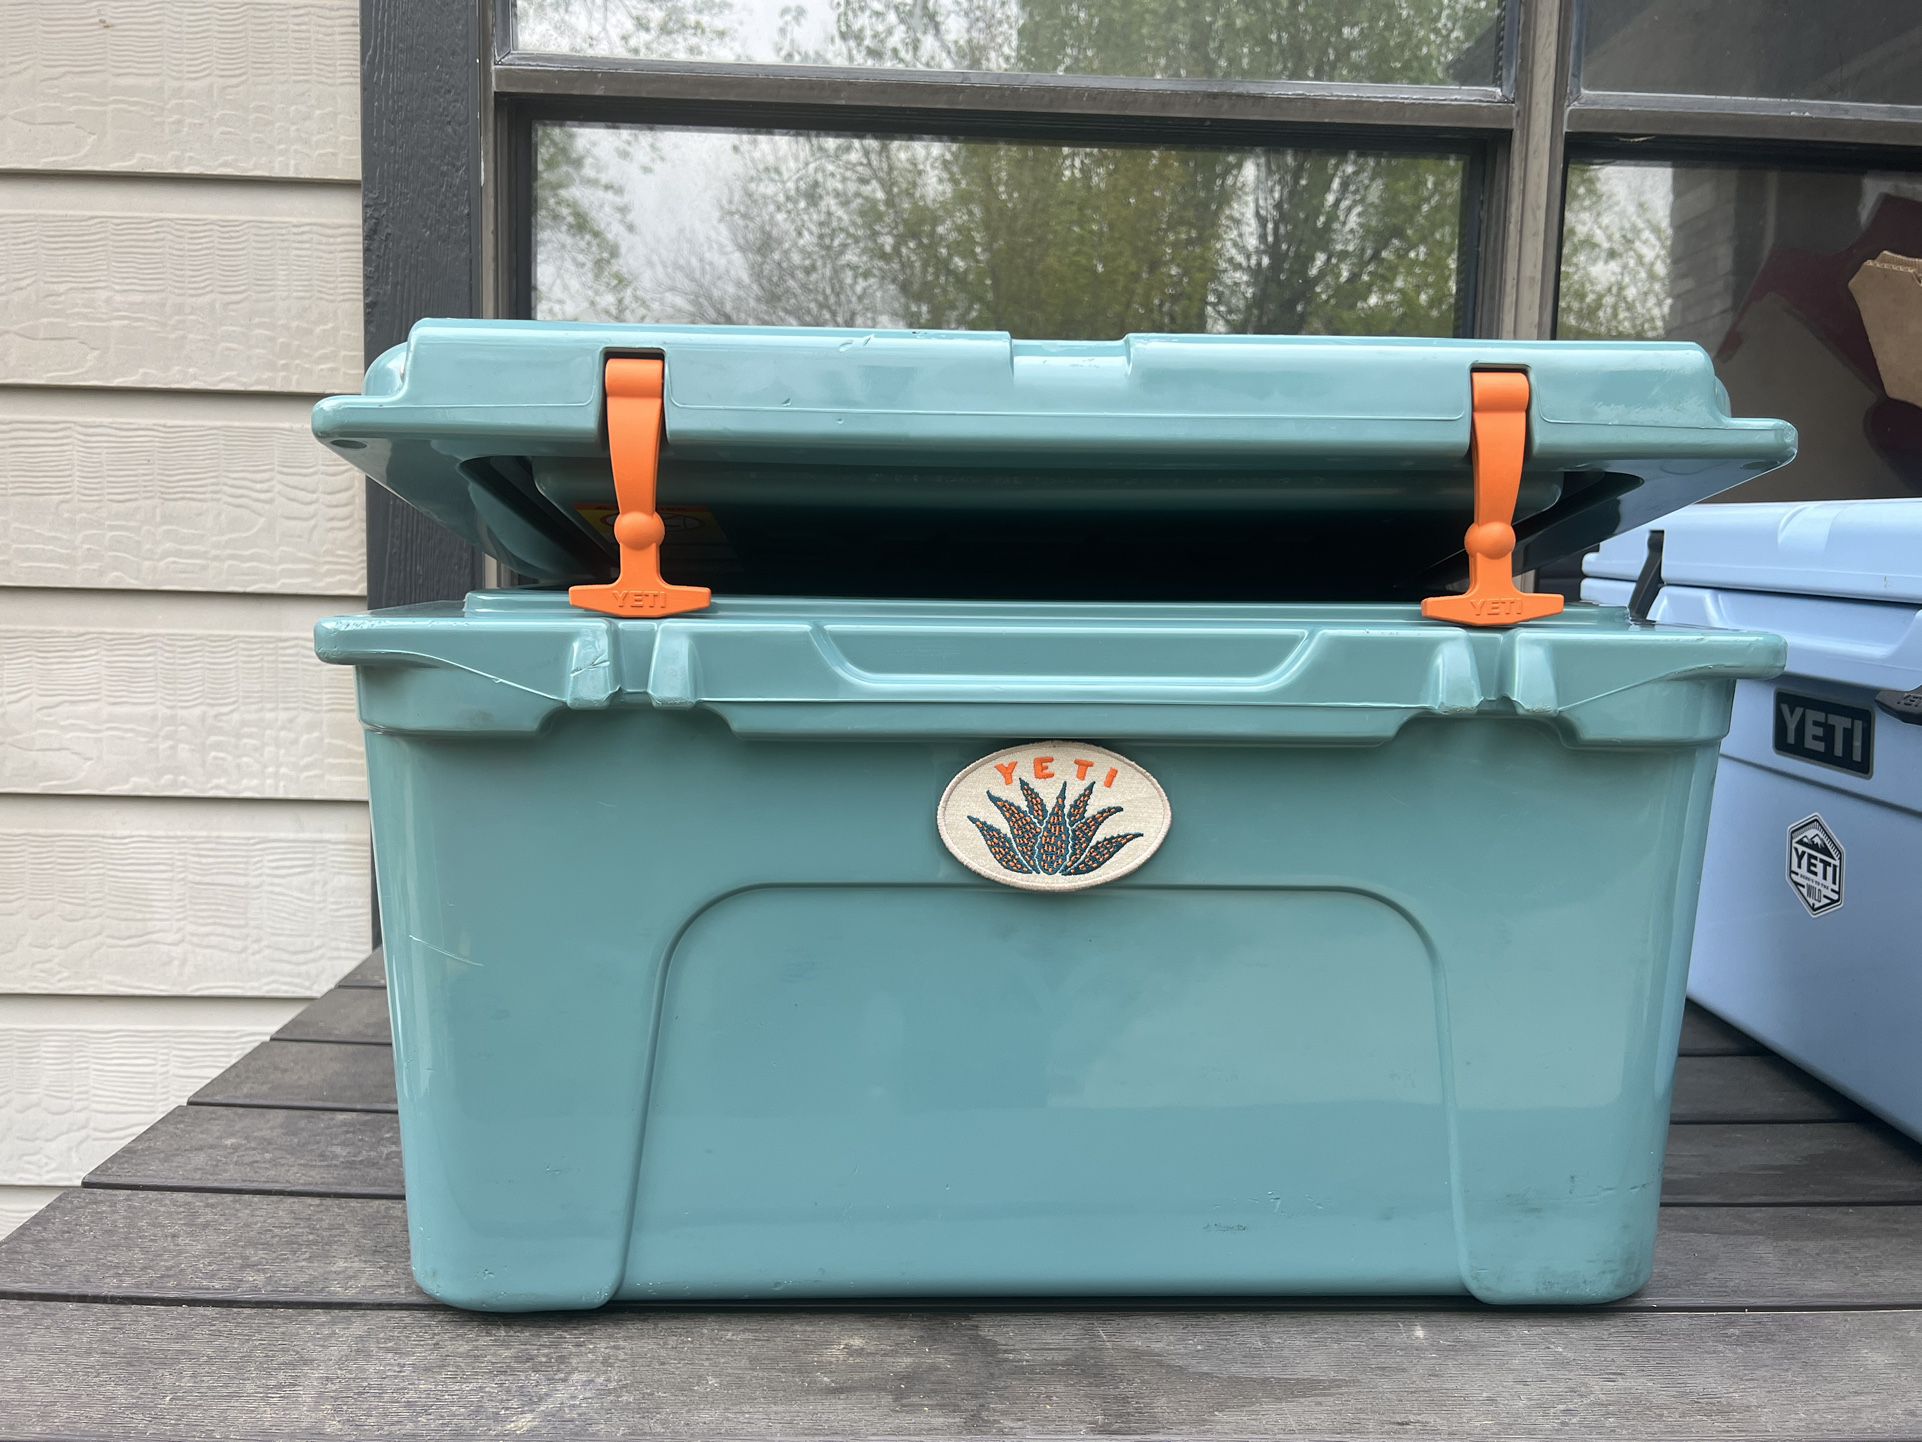 Yeti Used River Green Tundra Cooler 45. Discontinued Yeti Cooler. Rare $450